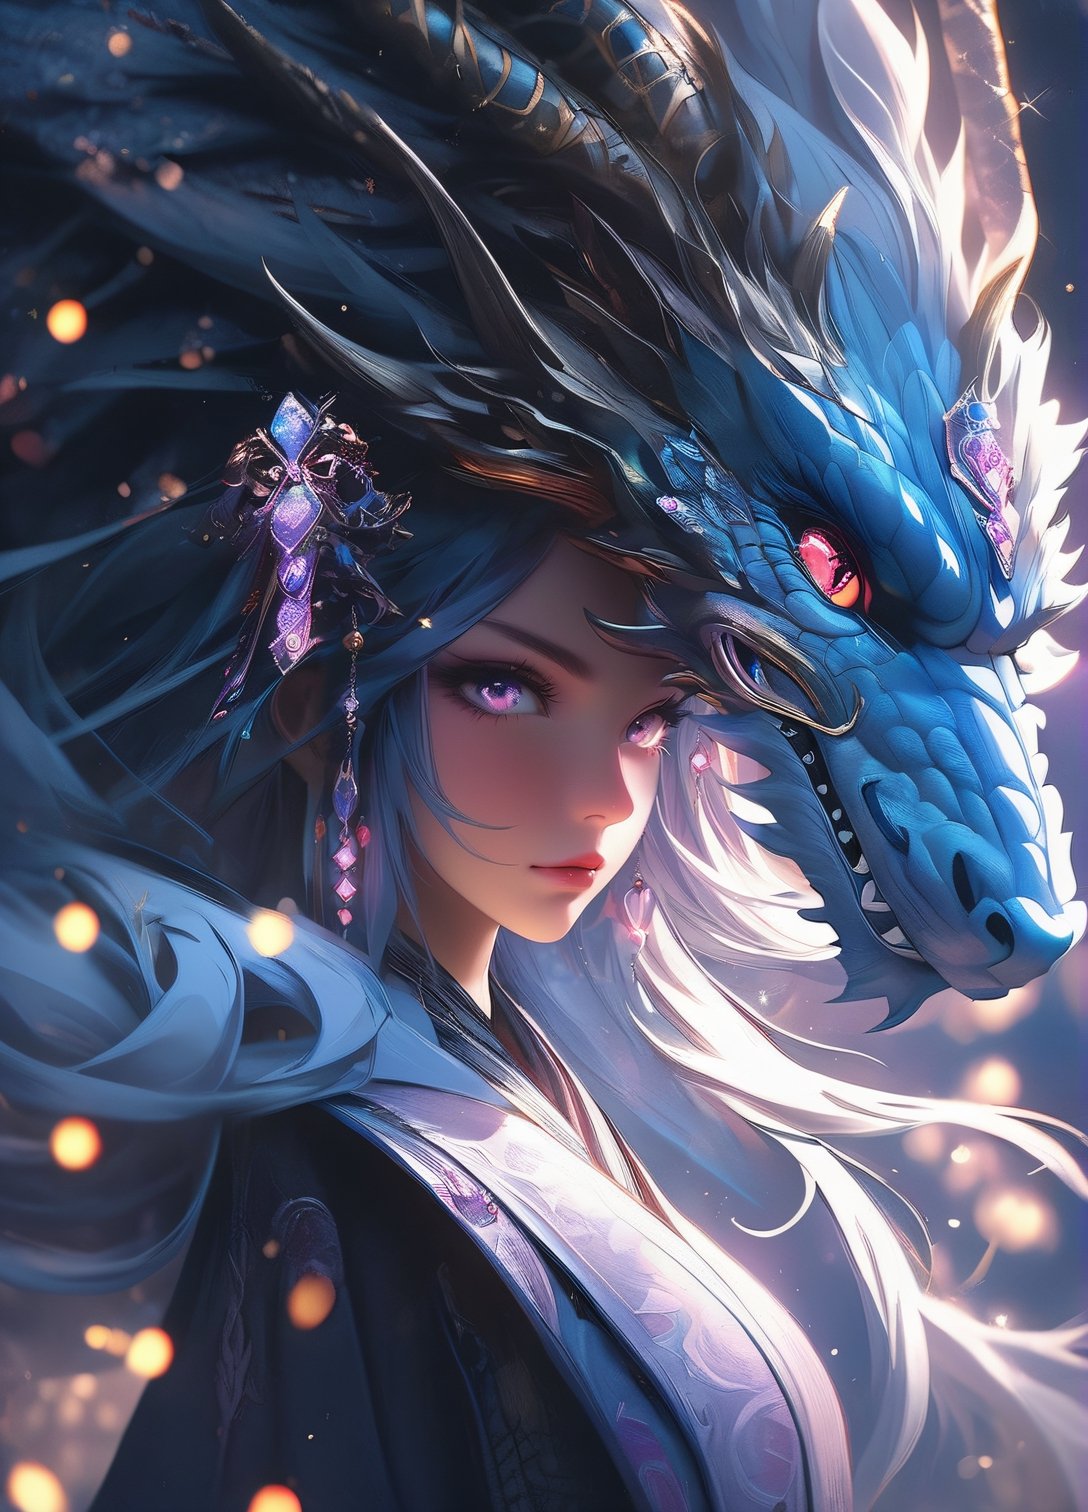 masterpiece, best qualityultra-realistic mix fantasy,(1 giant eastern dragon:1.3) behind an asian woman holding a glowing sword,void energy diamond sword, in the style of dark azure and light azure, mixes realistic and fantastical elements, vibrant manga, uhd image, glassy translucence, vibrant illustrations, ultra realistic, long hair, straight hair, light purple hair,head jewelly, jewelly, shawls,light In eyes, red eyes, portrait, firefly, bokeh, mysterious, fantasy, cloud, abstract, colorful background, night sky, flame, very detailed, high resolution, sharp, sharp image, 4k, 8k, masterpiece, best quality, magic effect, (high contrast:1.4), dream art, diamond, skin detail, face detail, eyes detail, mysterious colorful background, dark blue themes